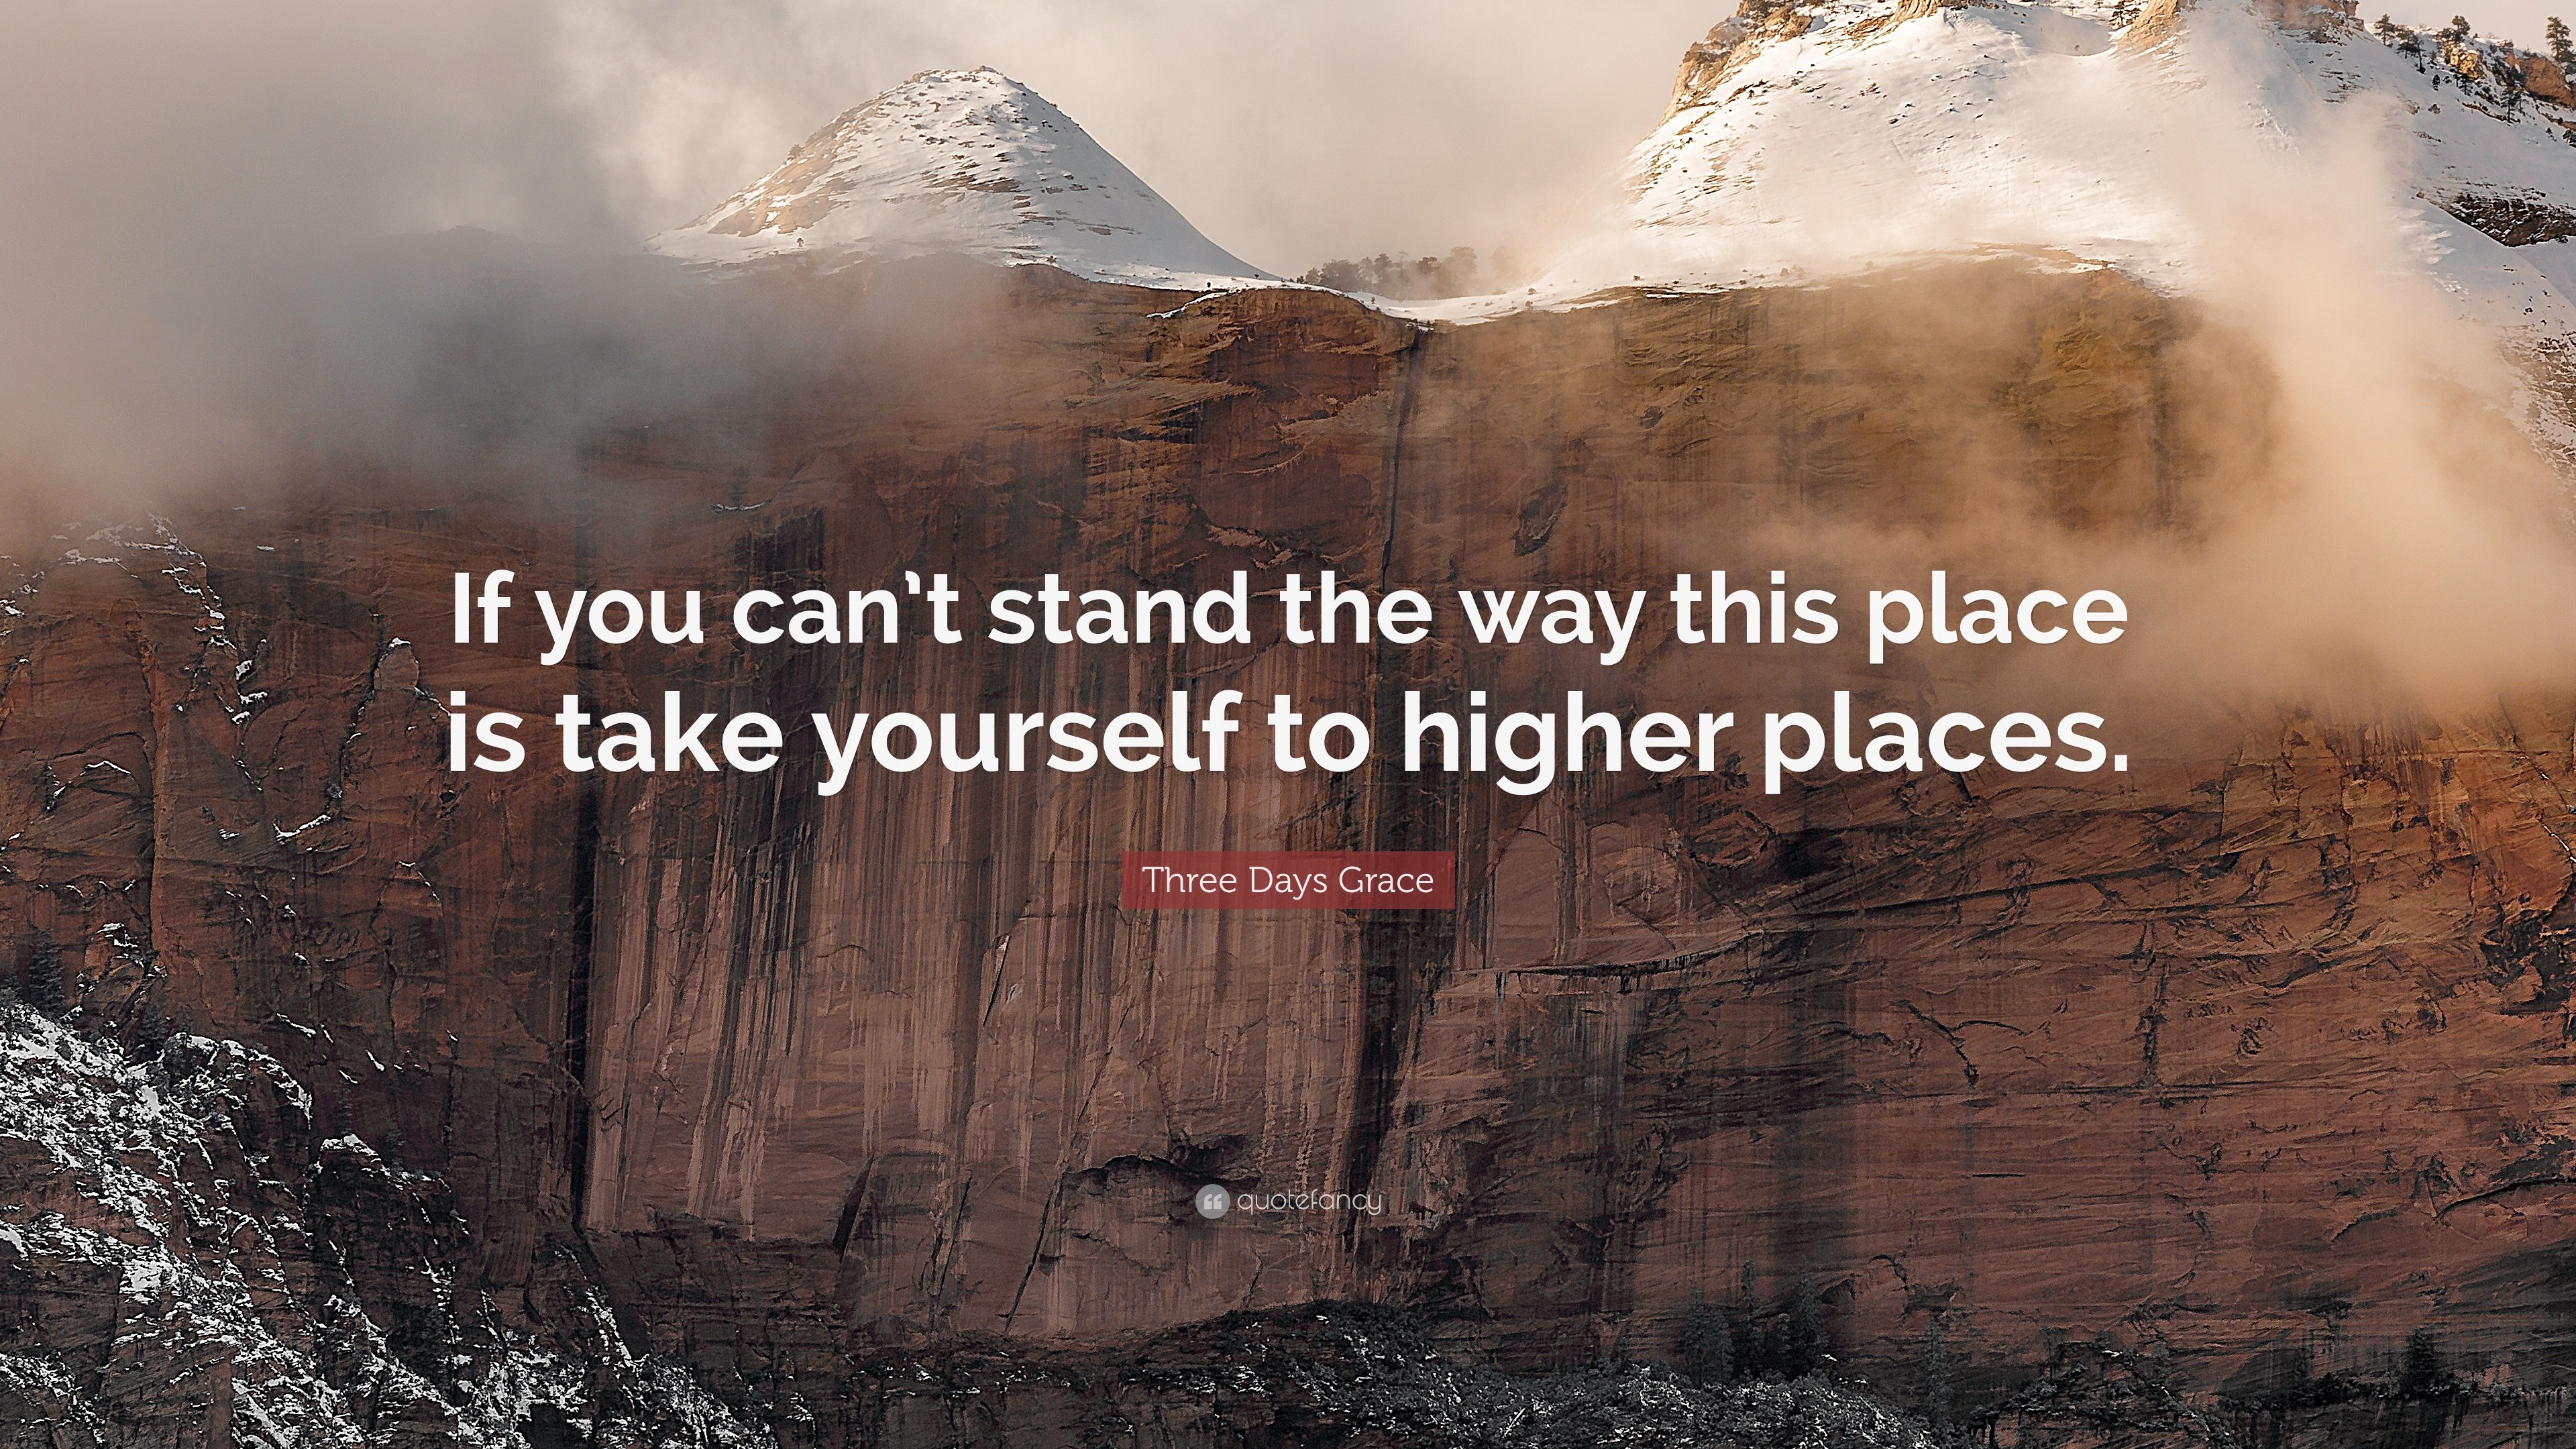 3840x2160 Three Days Grace Quote: “If you can't stand the way this place